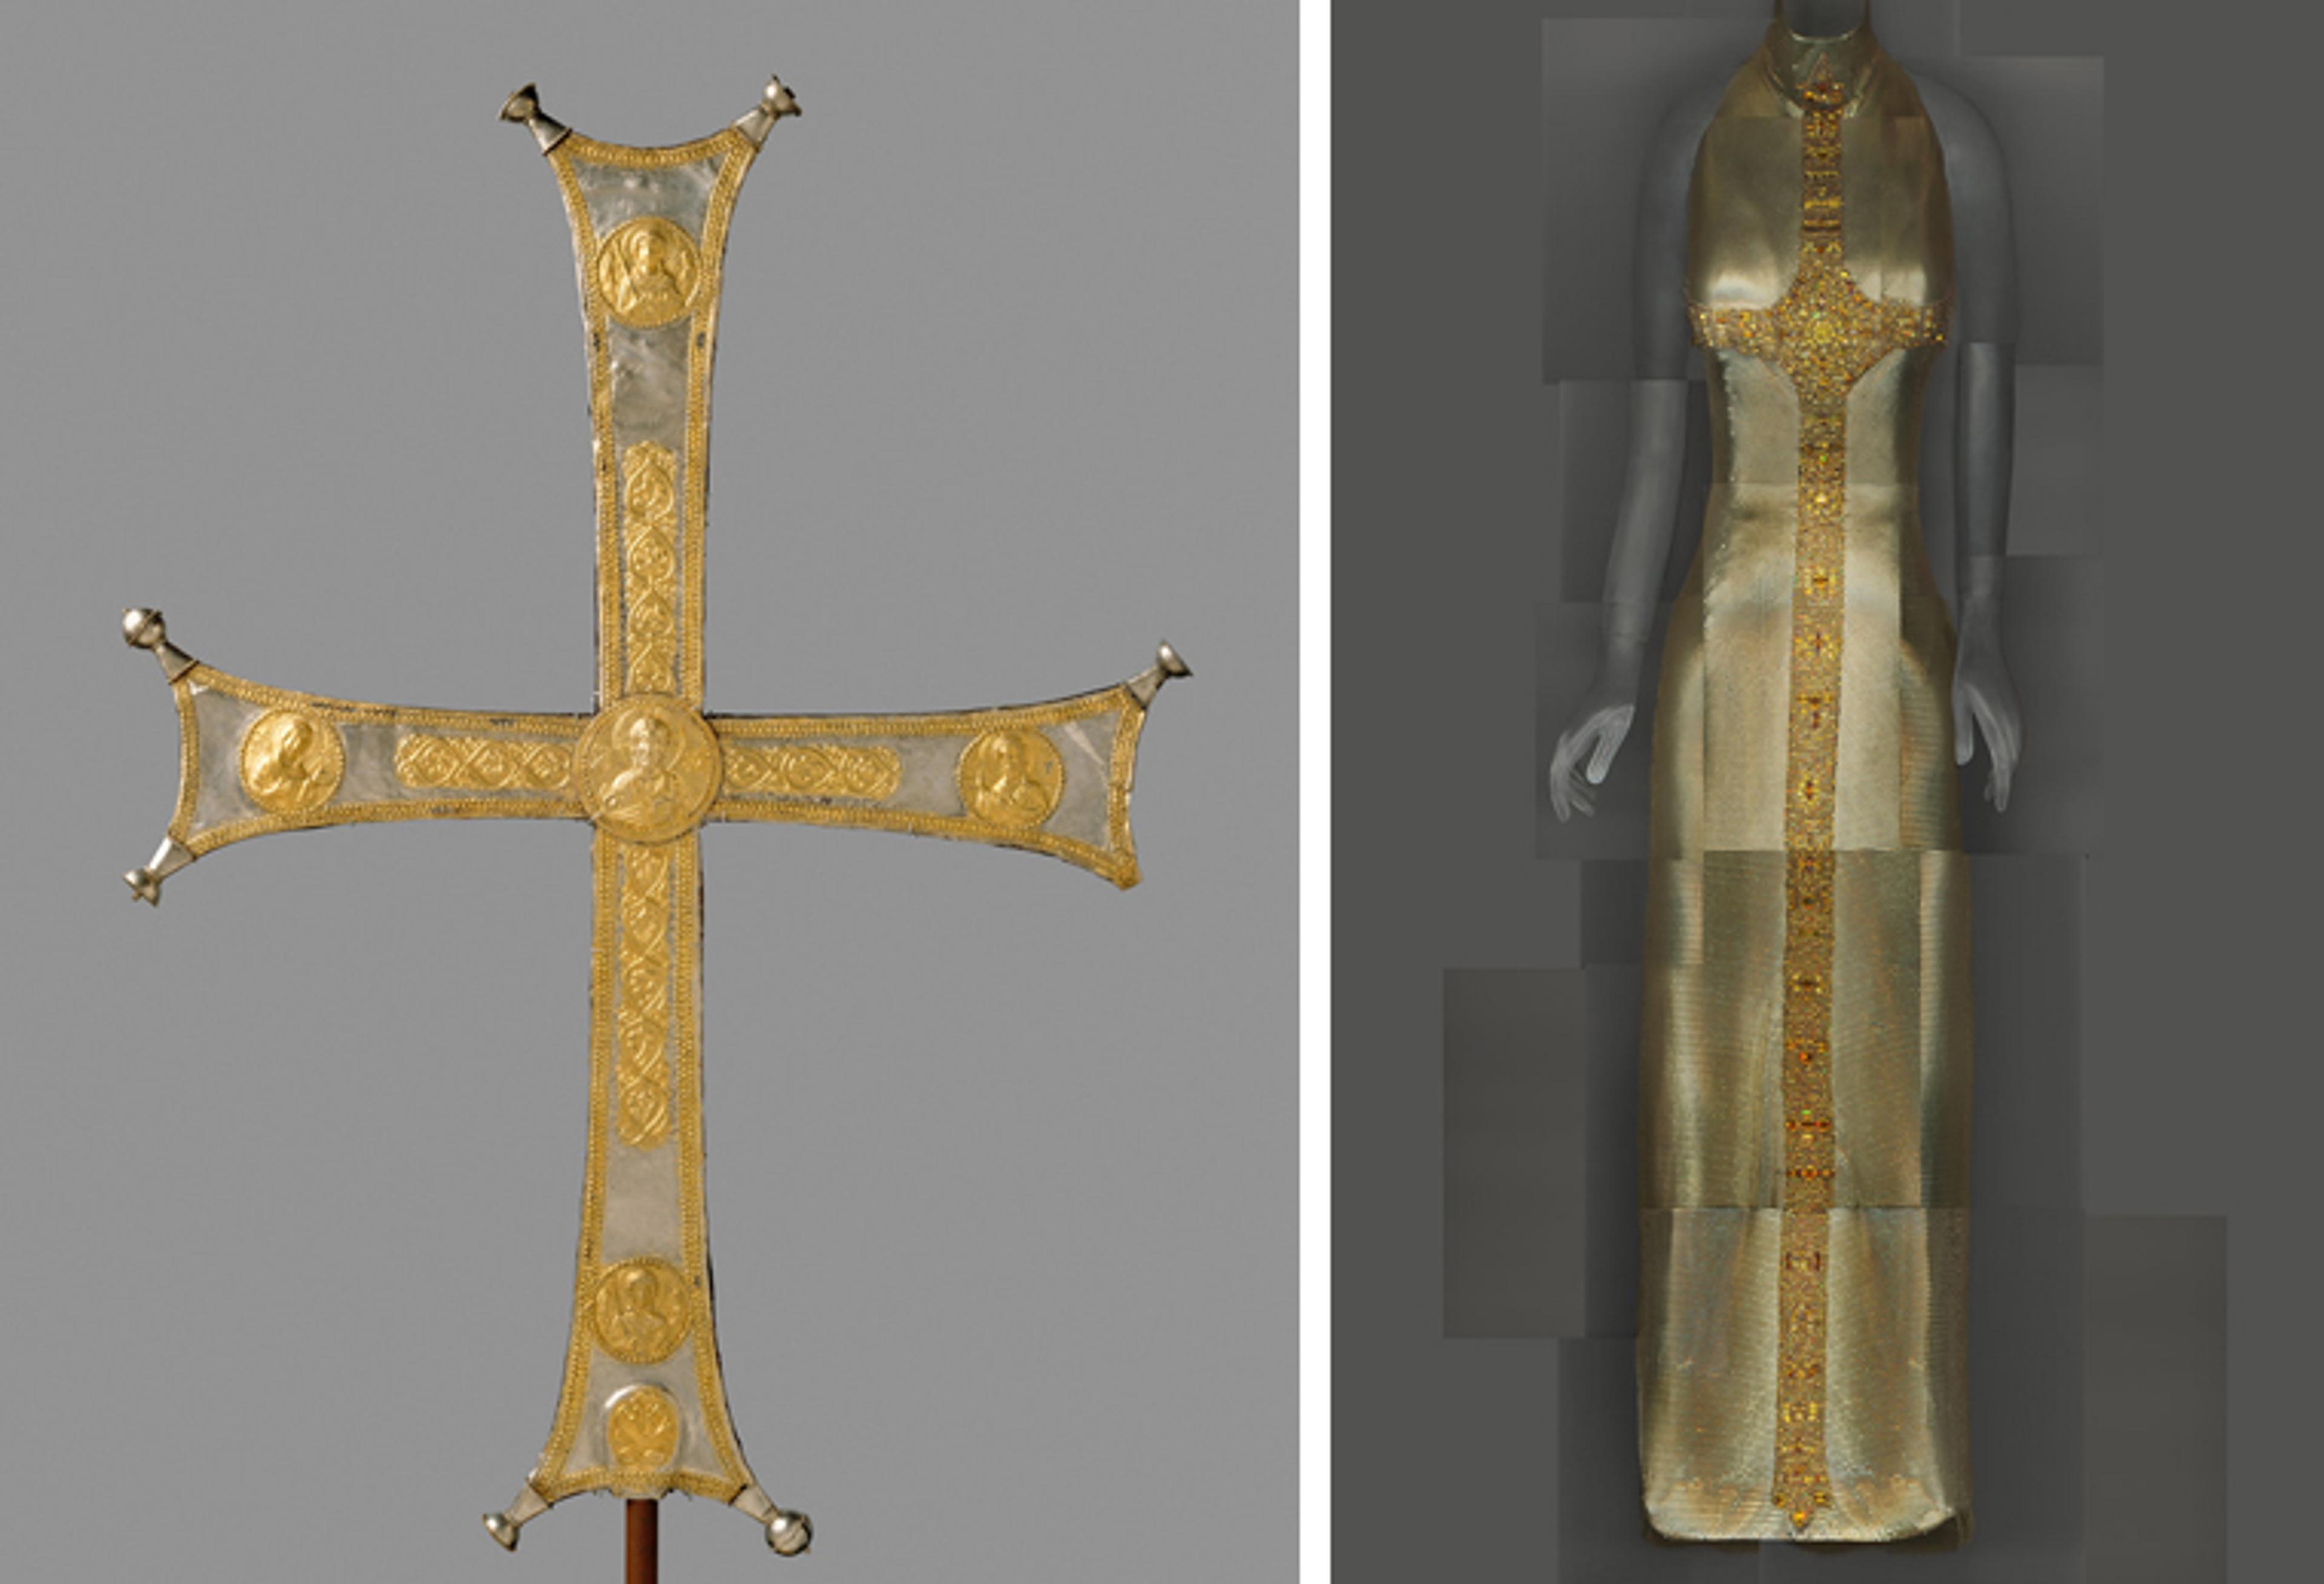 A Byzantine processional cross at left, and a Gianni Versace evening dress with a cross design at right